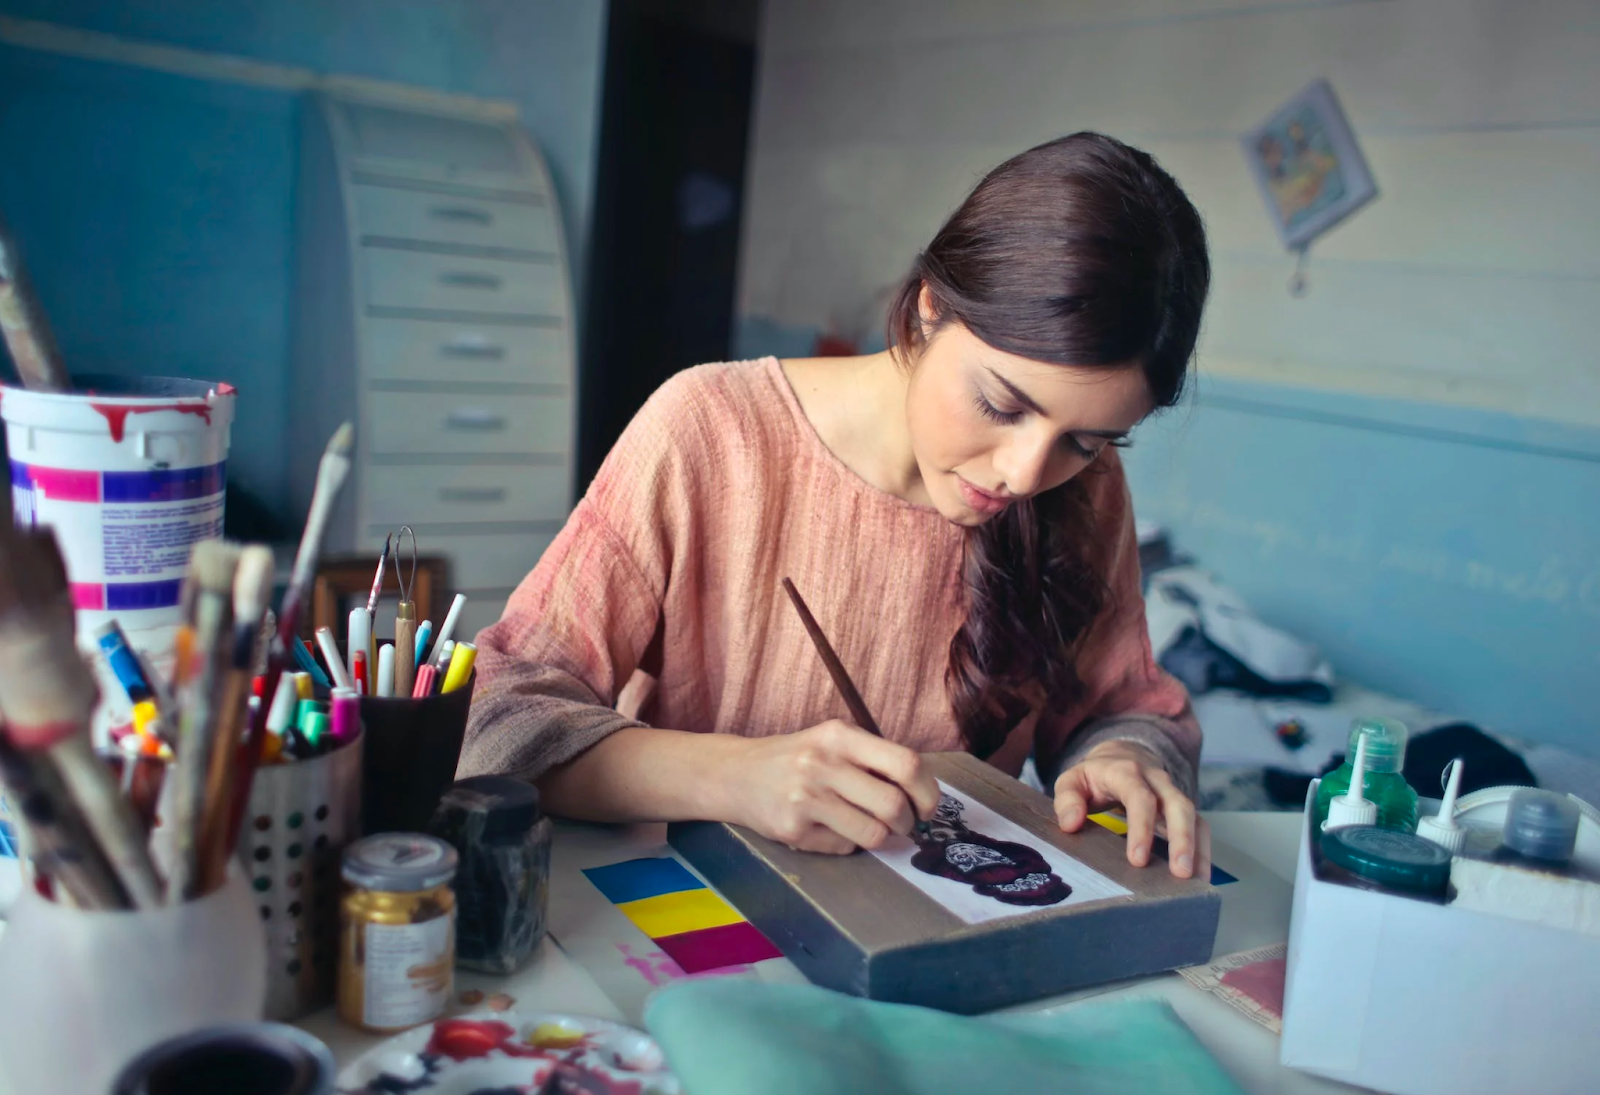 brown haired girl painting at her desk surrounded by brushes